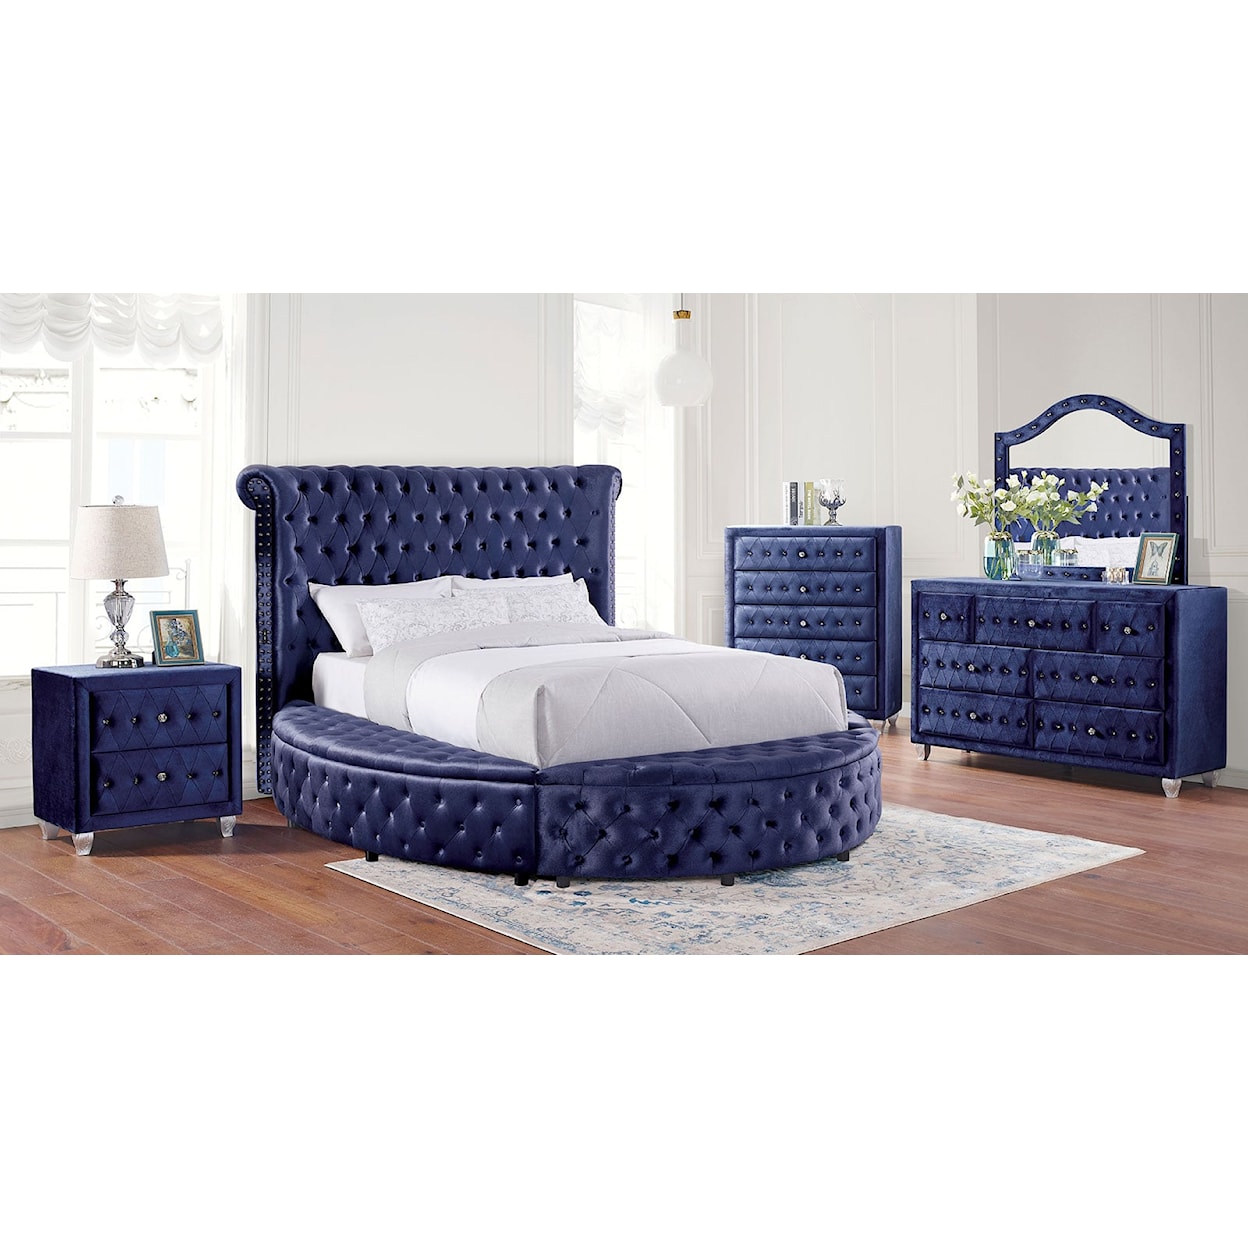 Furniture of America Sansom 4-Piece Upholstered Queen Round Bed